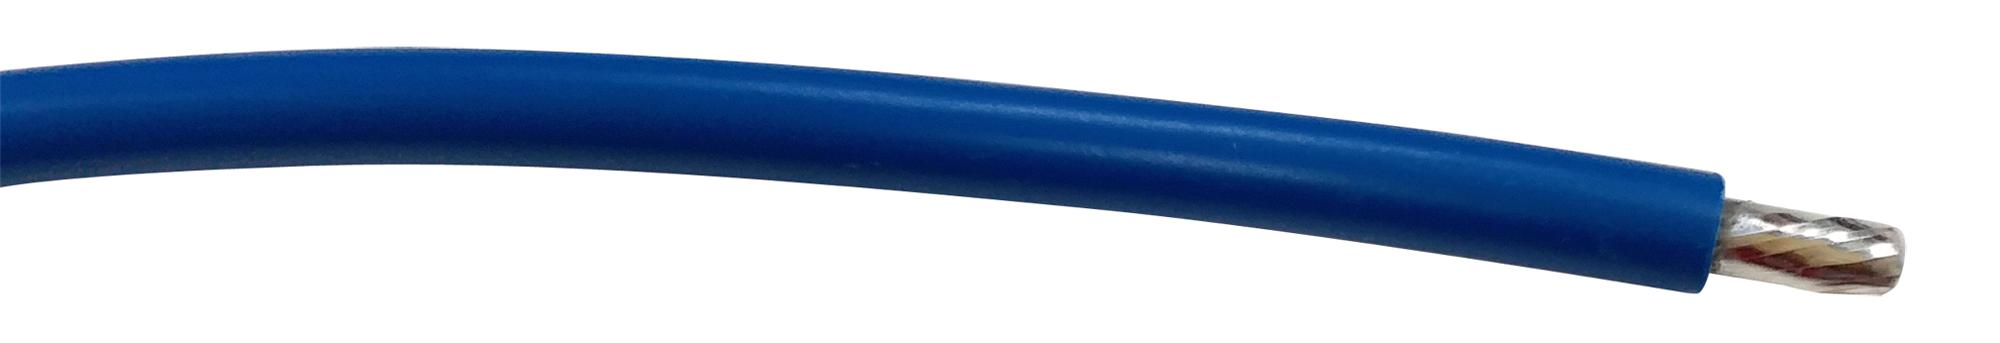 PP002542 CABLE WIRE, 26AWG, BLUE, 305M PRO POWER